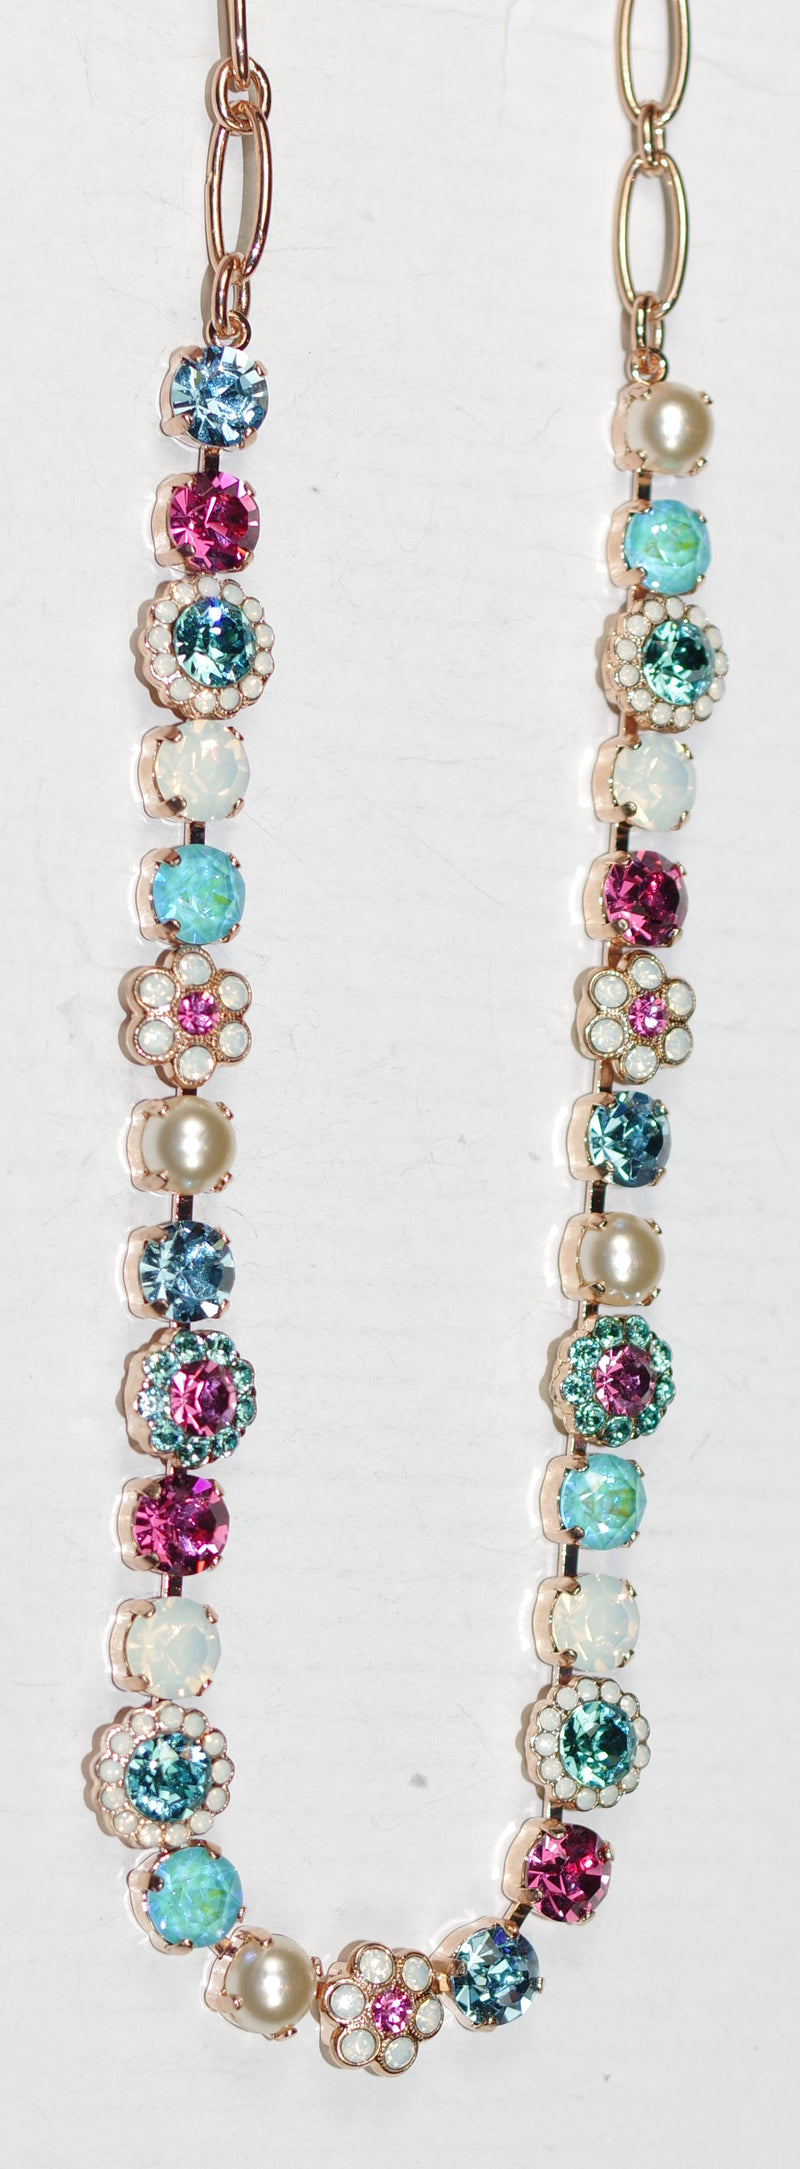 MARIANA NECKLACE BANANA SPLIT: white, pink, blue stones in rose gold setting, 18" adjustable chain